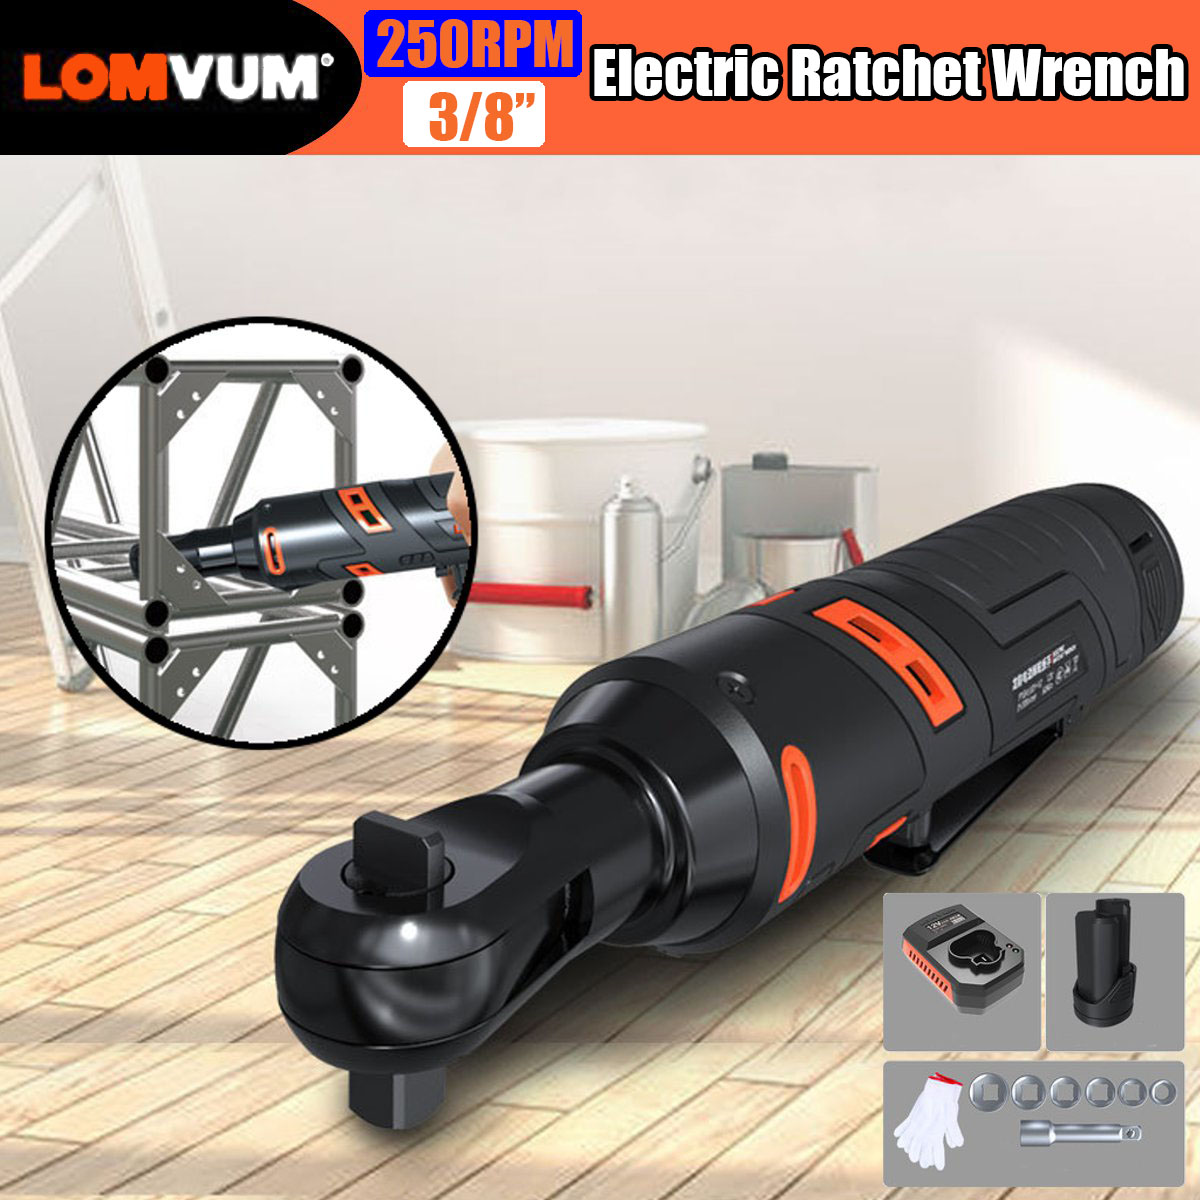 Power-Cordless-Ratchet-Wrench-Toolkit-38Inch-60NM-12V-Electric-Ratchet-Wrench-Right-Angle-With-Batte-1529794-1